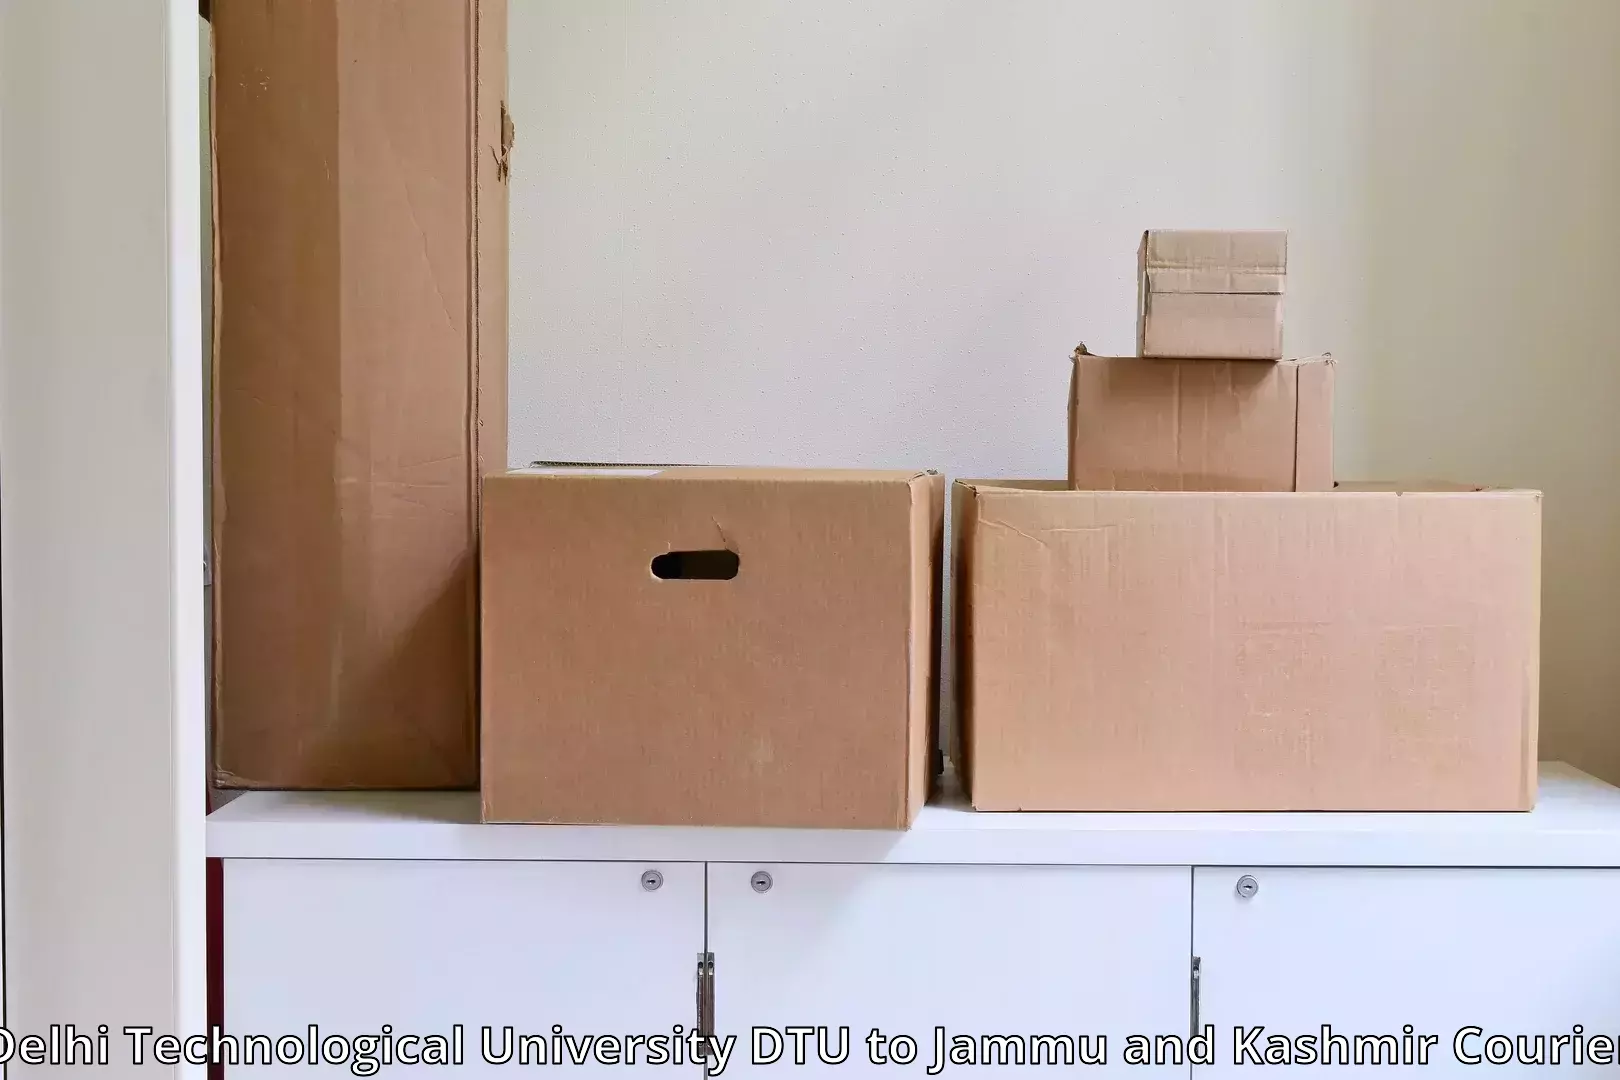 Professional packing services in Delhi Technological University DTU to Jakh